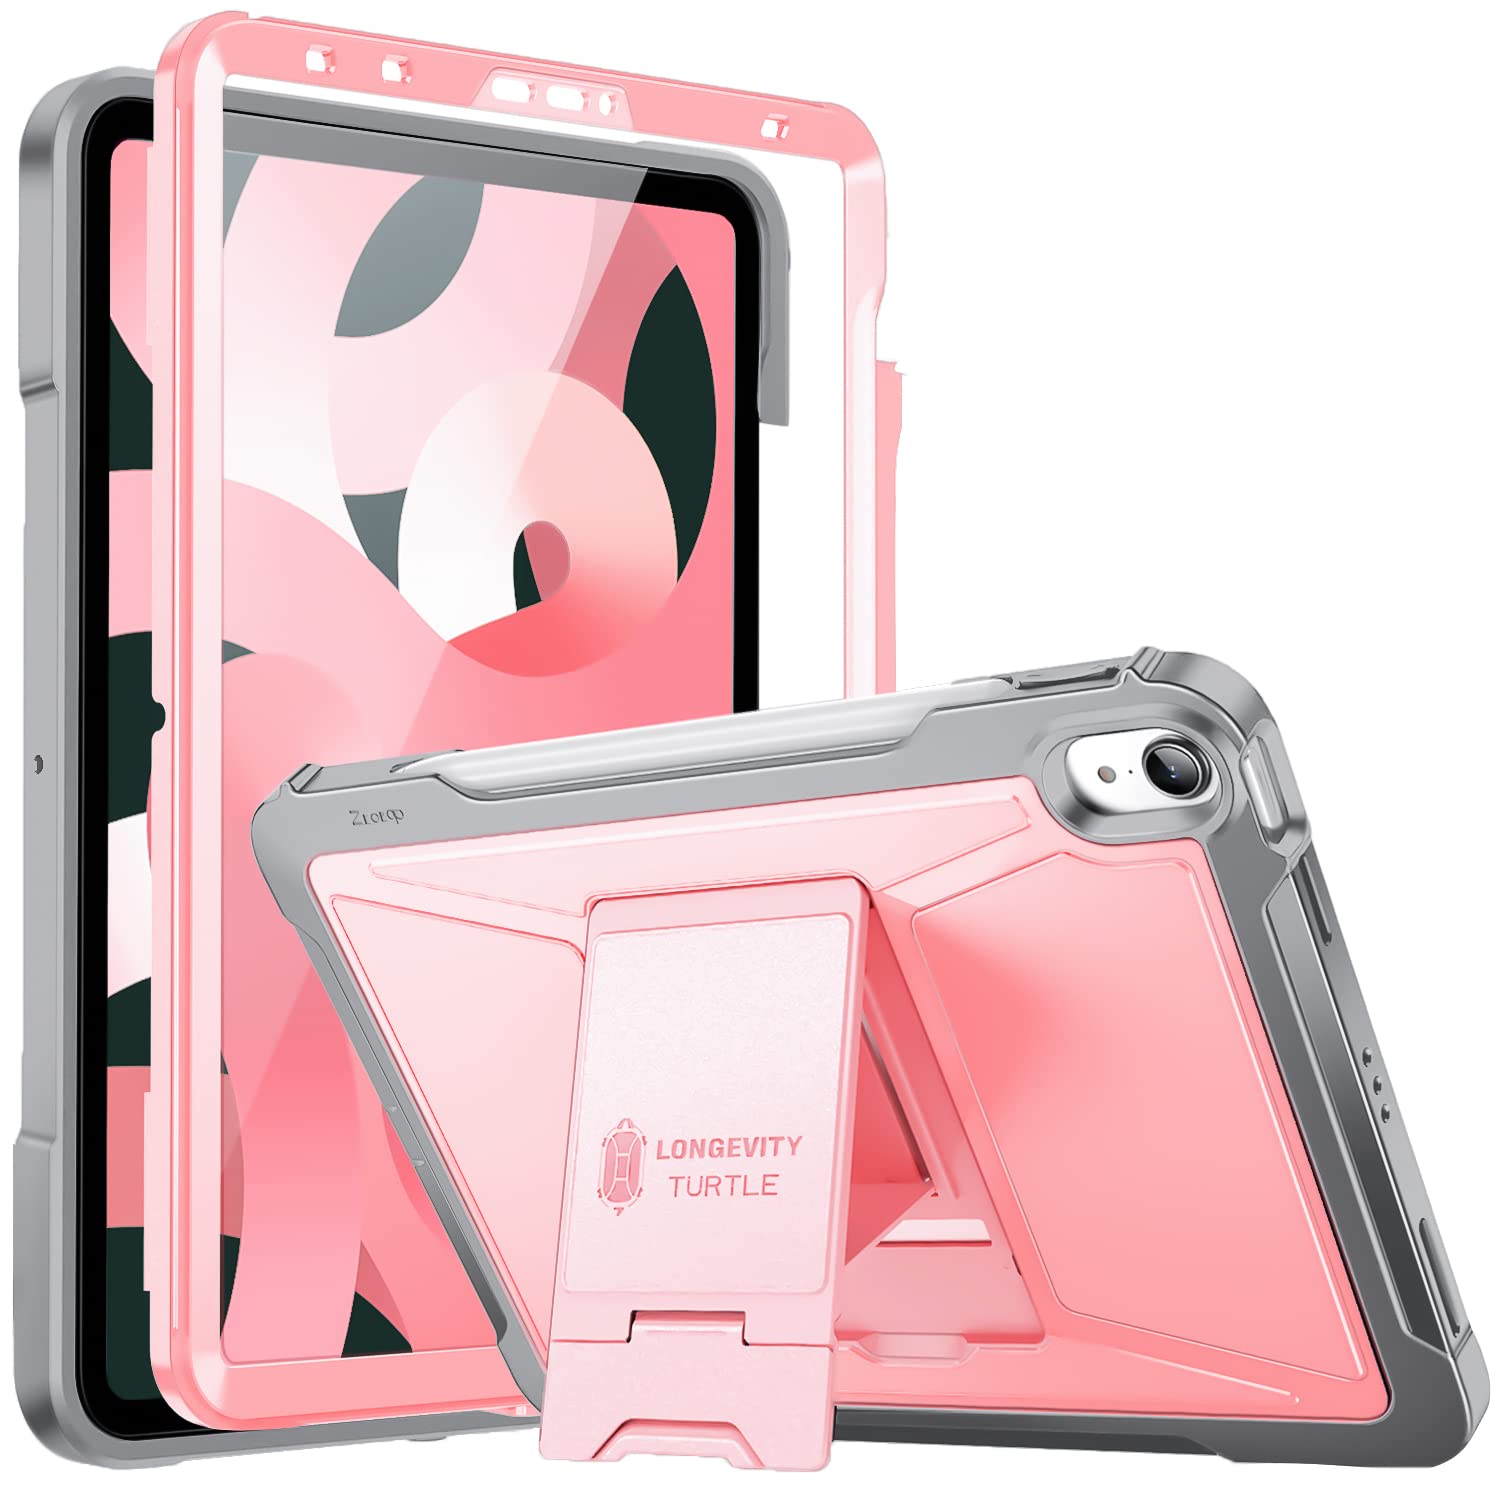 ZtotopCases for New iPad 10.9 Inch 2020/ iPad Air 4th Generation Case, Built-in Screen Protector, Dual Layer Shockproof Full Protective Cover with Pencil Holder, Support Apple Pencil 2 Charging- Pink